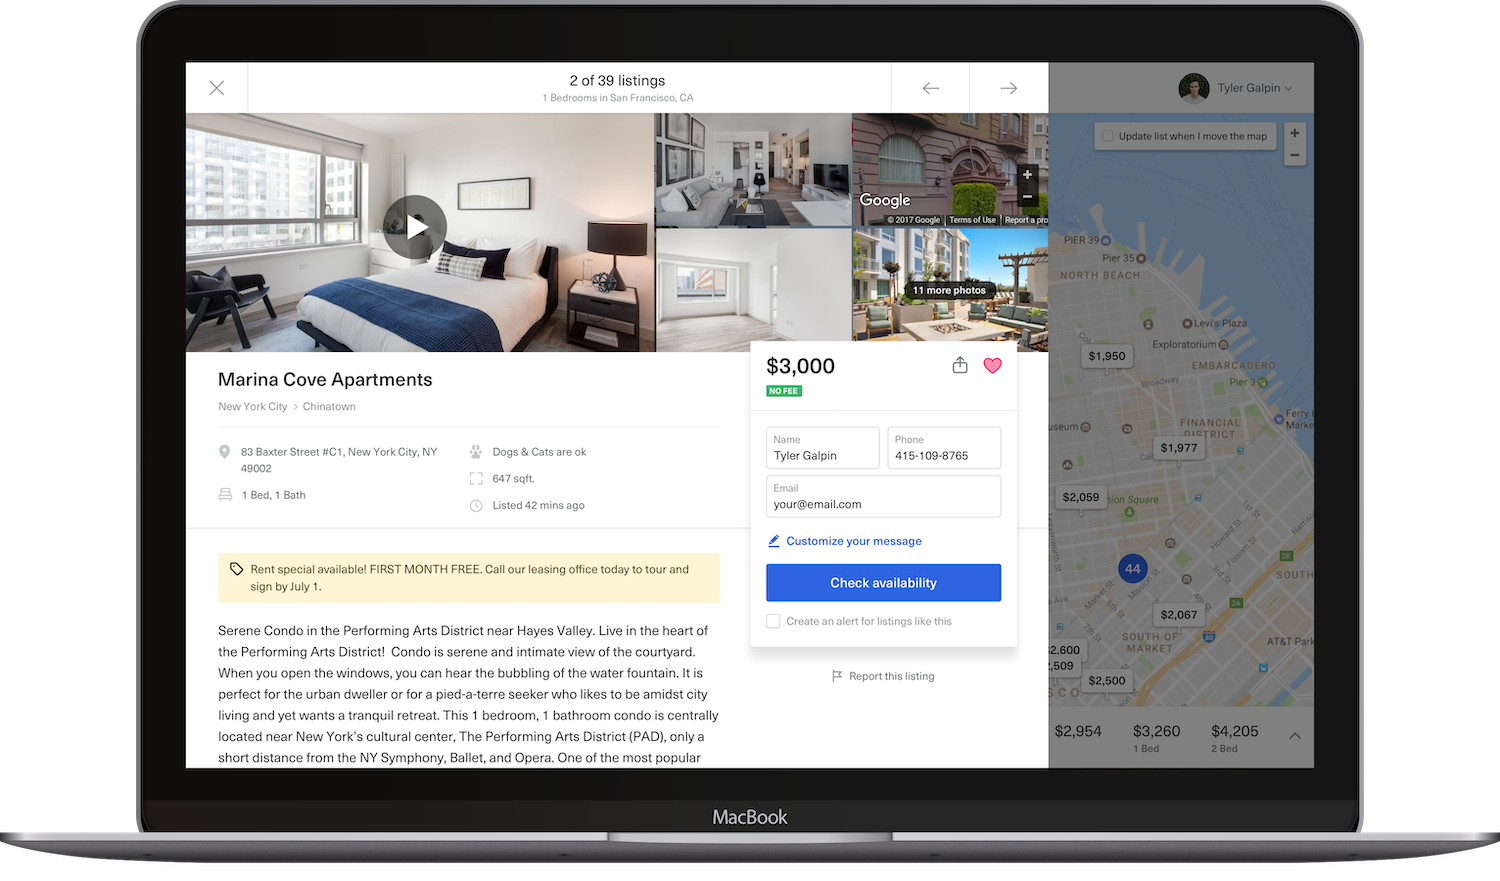 Zumper's listing view takes cues from Airbnb's.